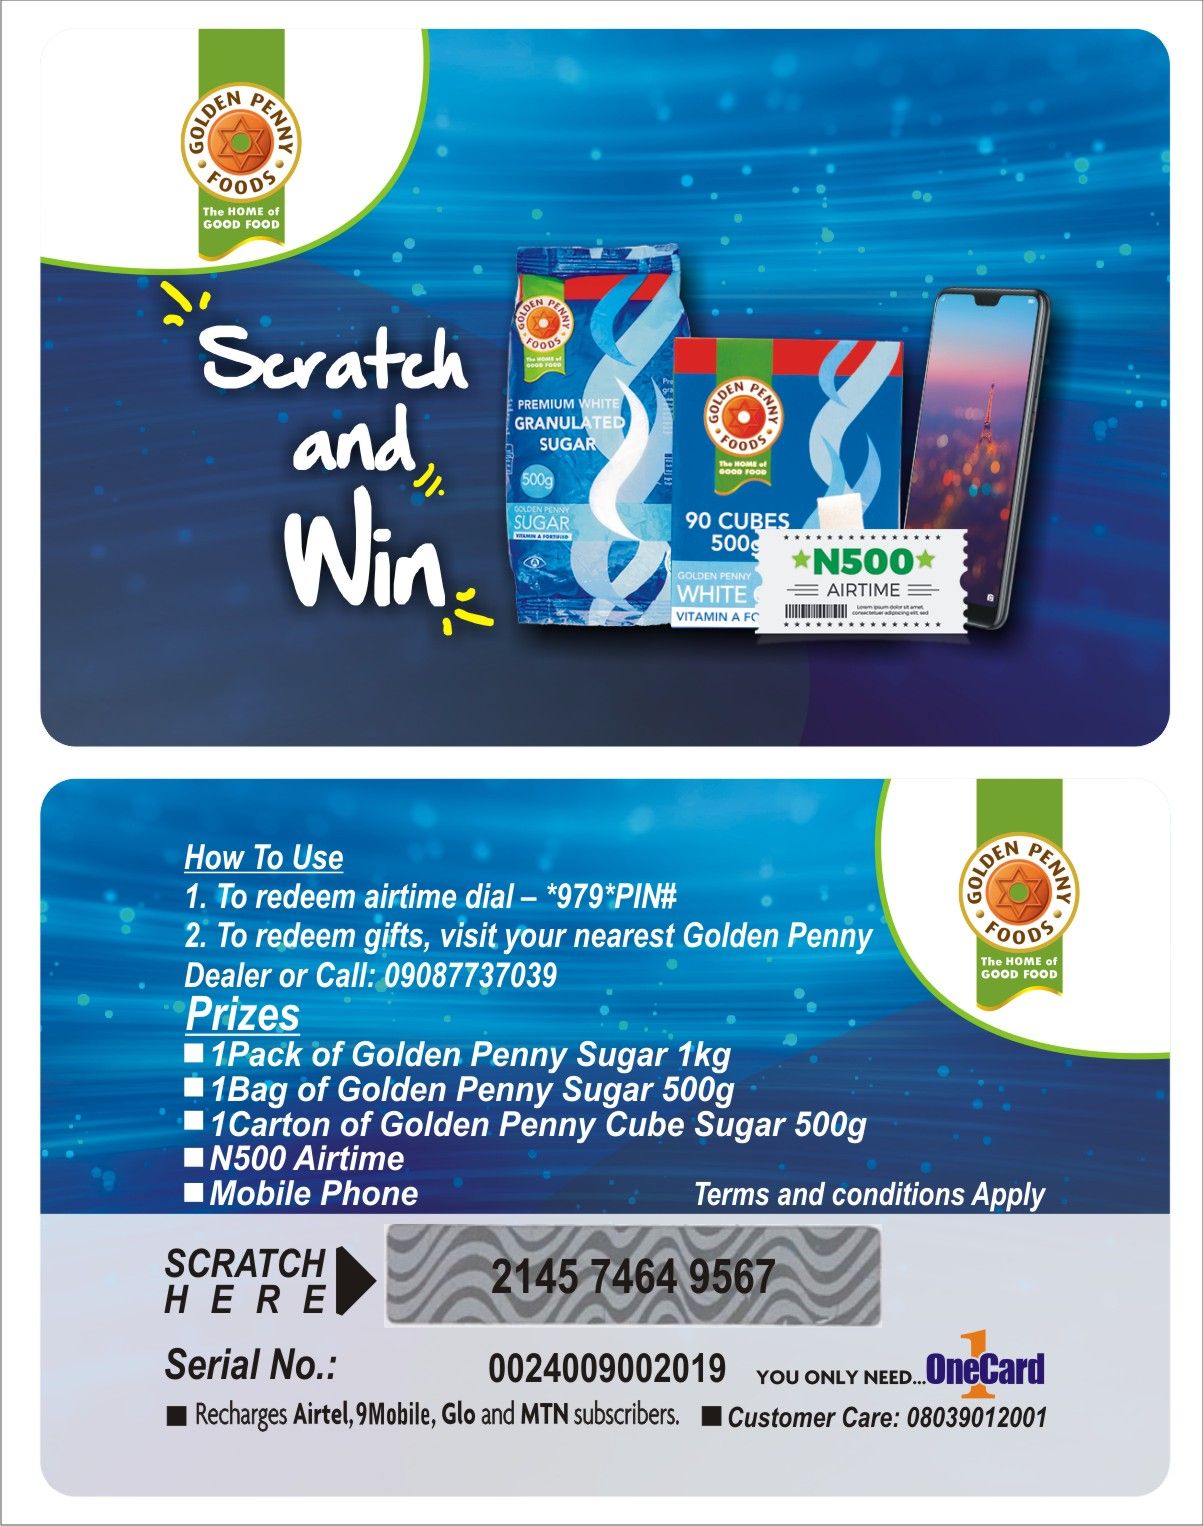 CALL CHINEDU ON 08179651585 TO PRINT SCRATCH AND WIN PROMO CARDS